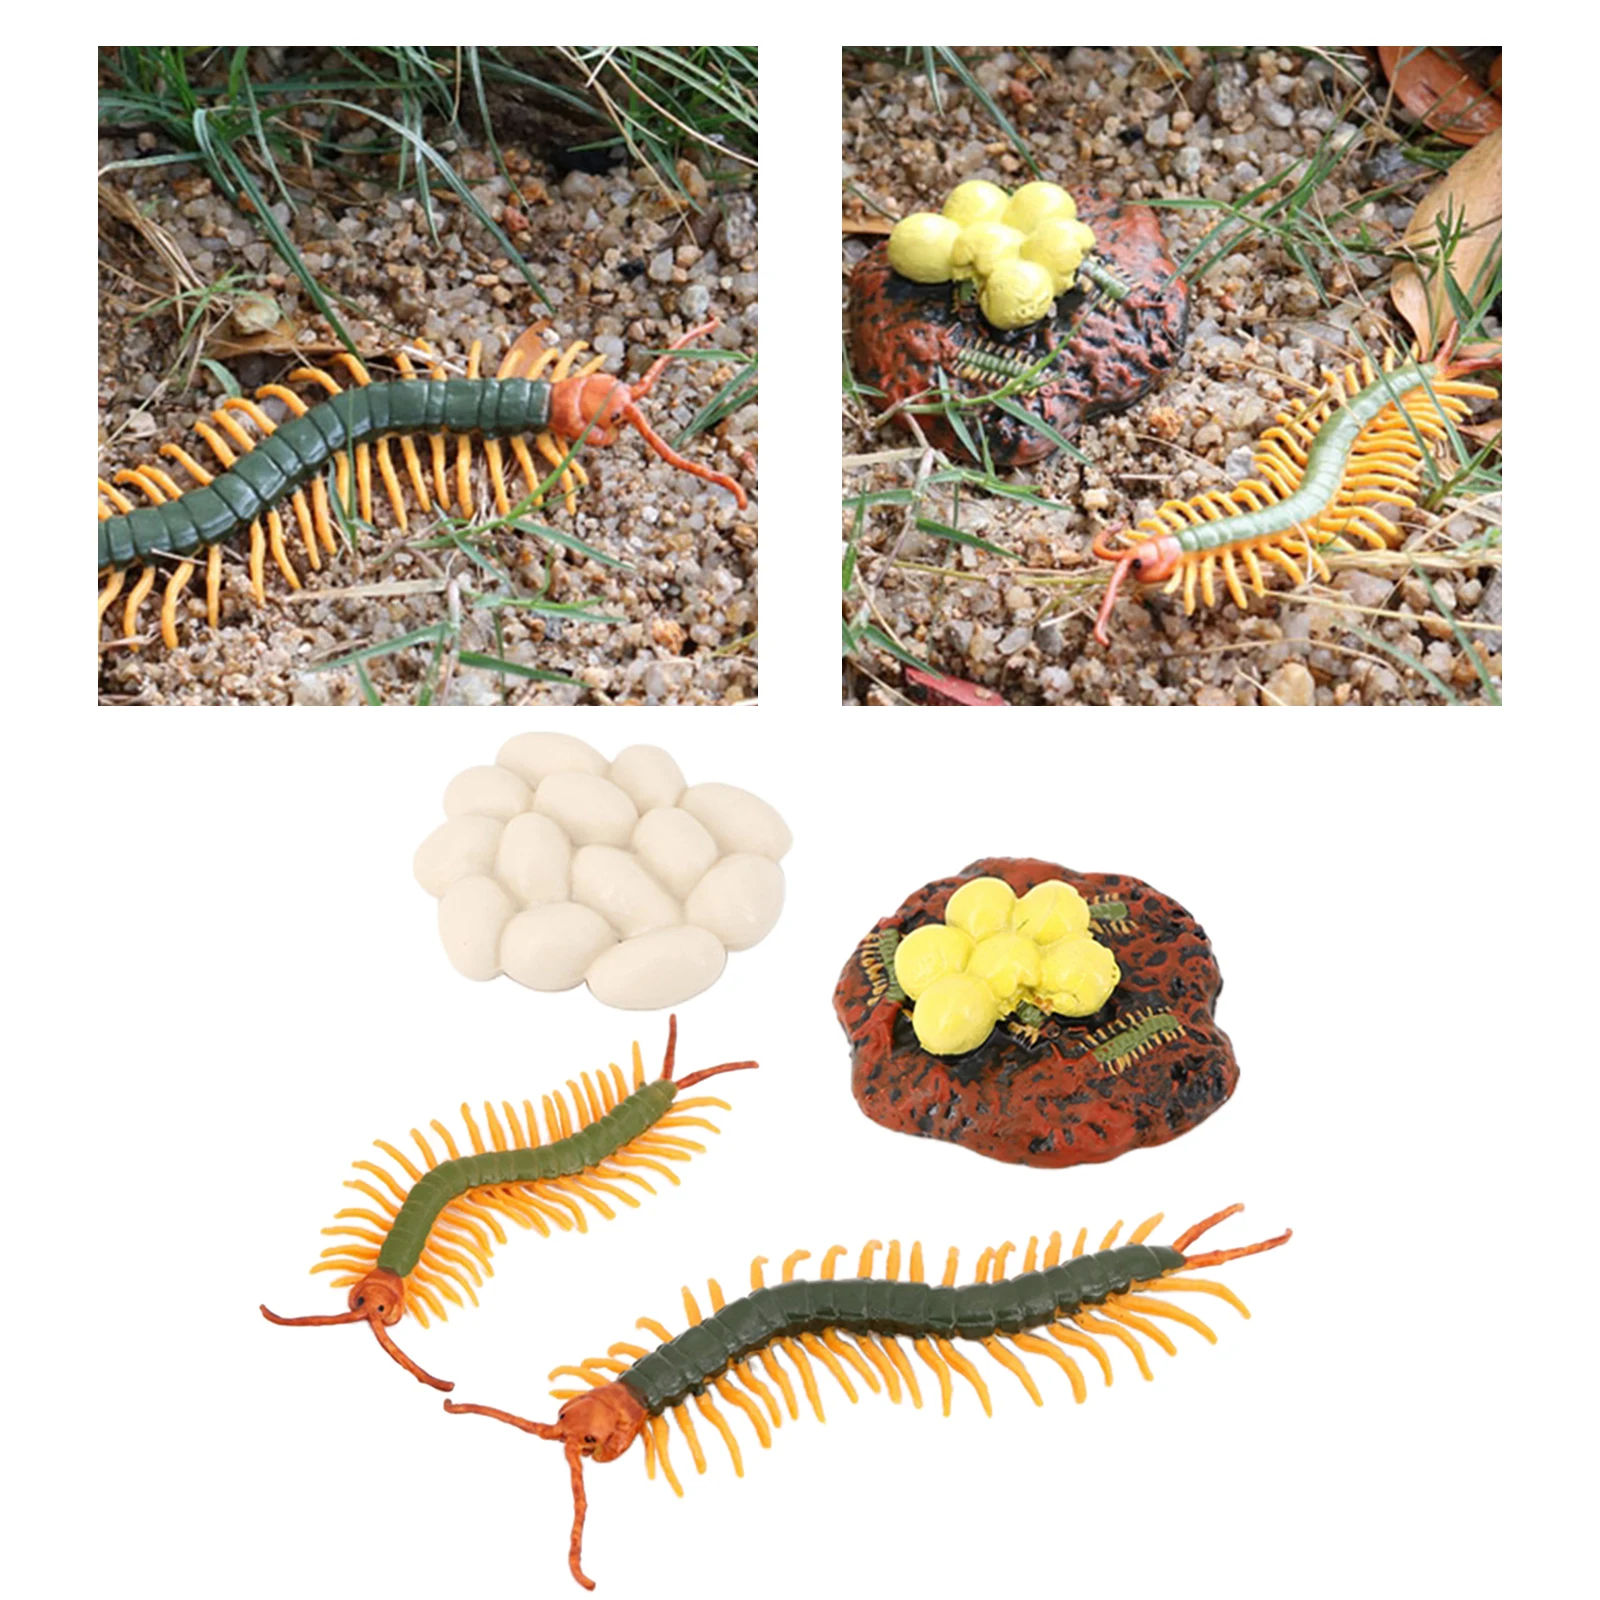 4 Stages Life Cycle of Centipede Nature Insects Life Cycles Growth Model Game Prop Insect Animal Natural Toy